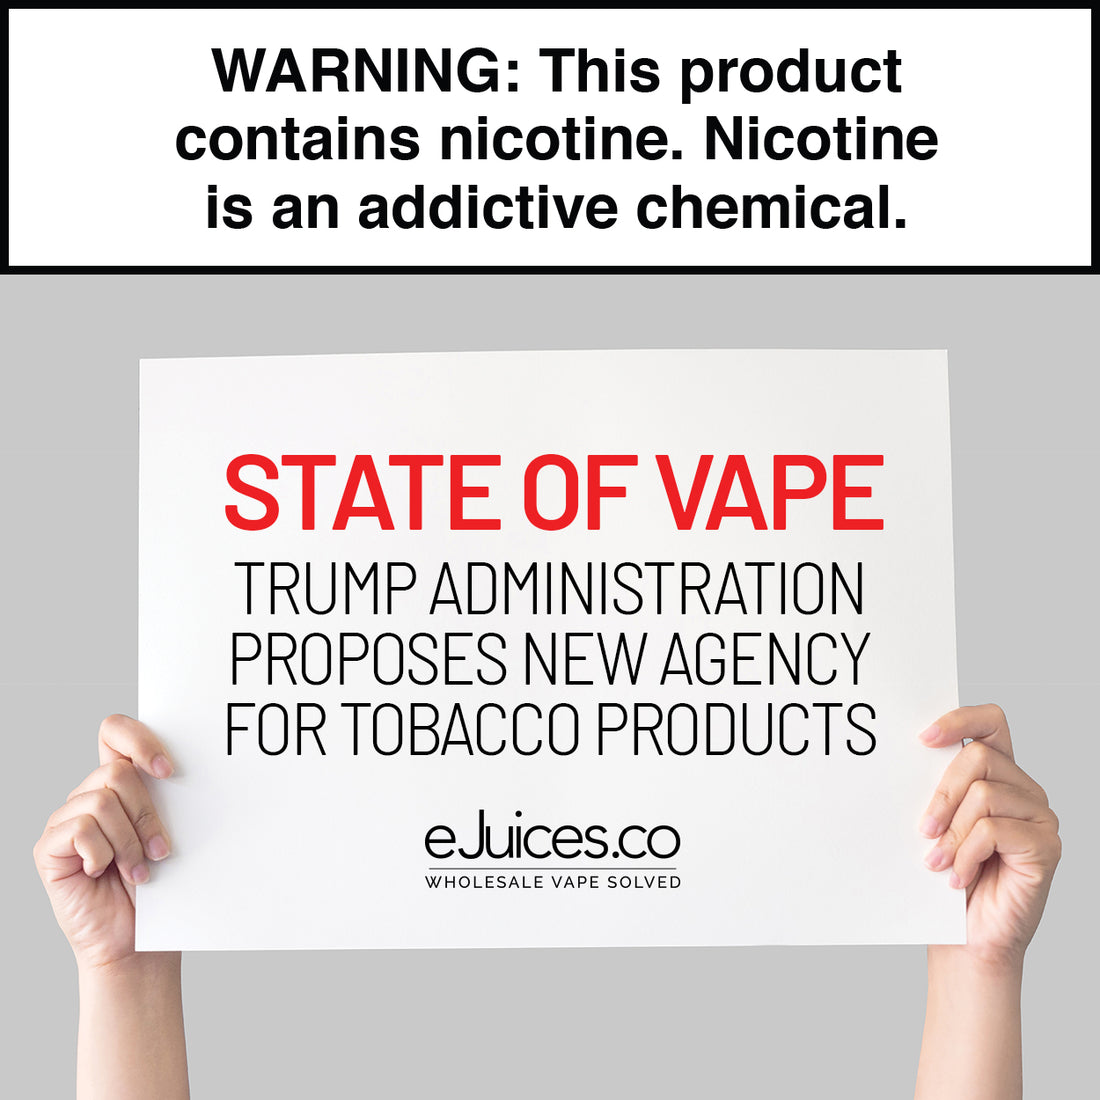 The State of Vape: Trump Administration Proposes New Agency For Tobacco Products